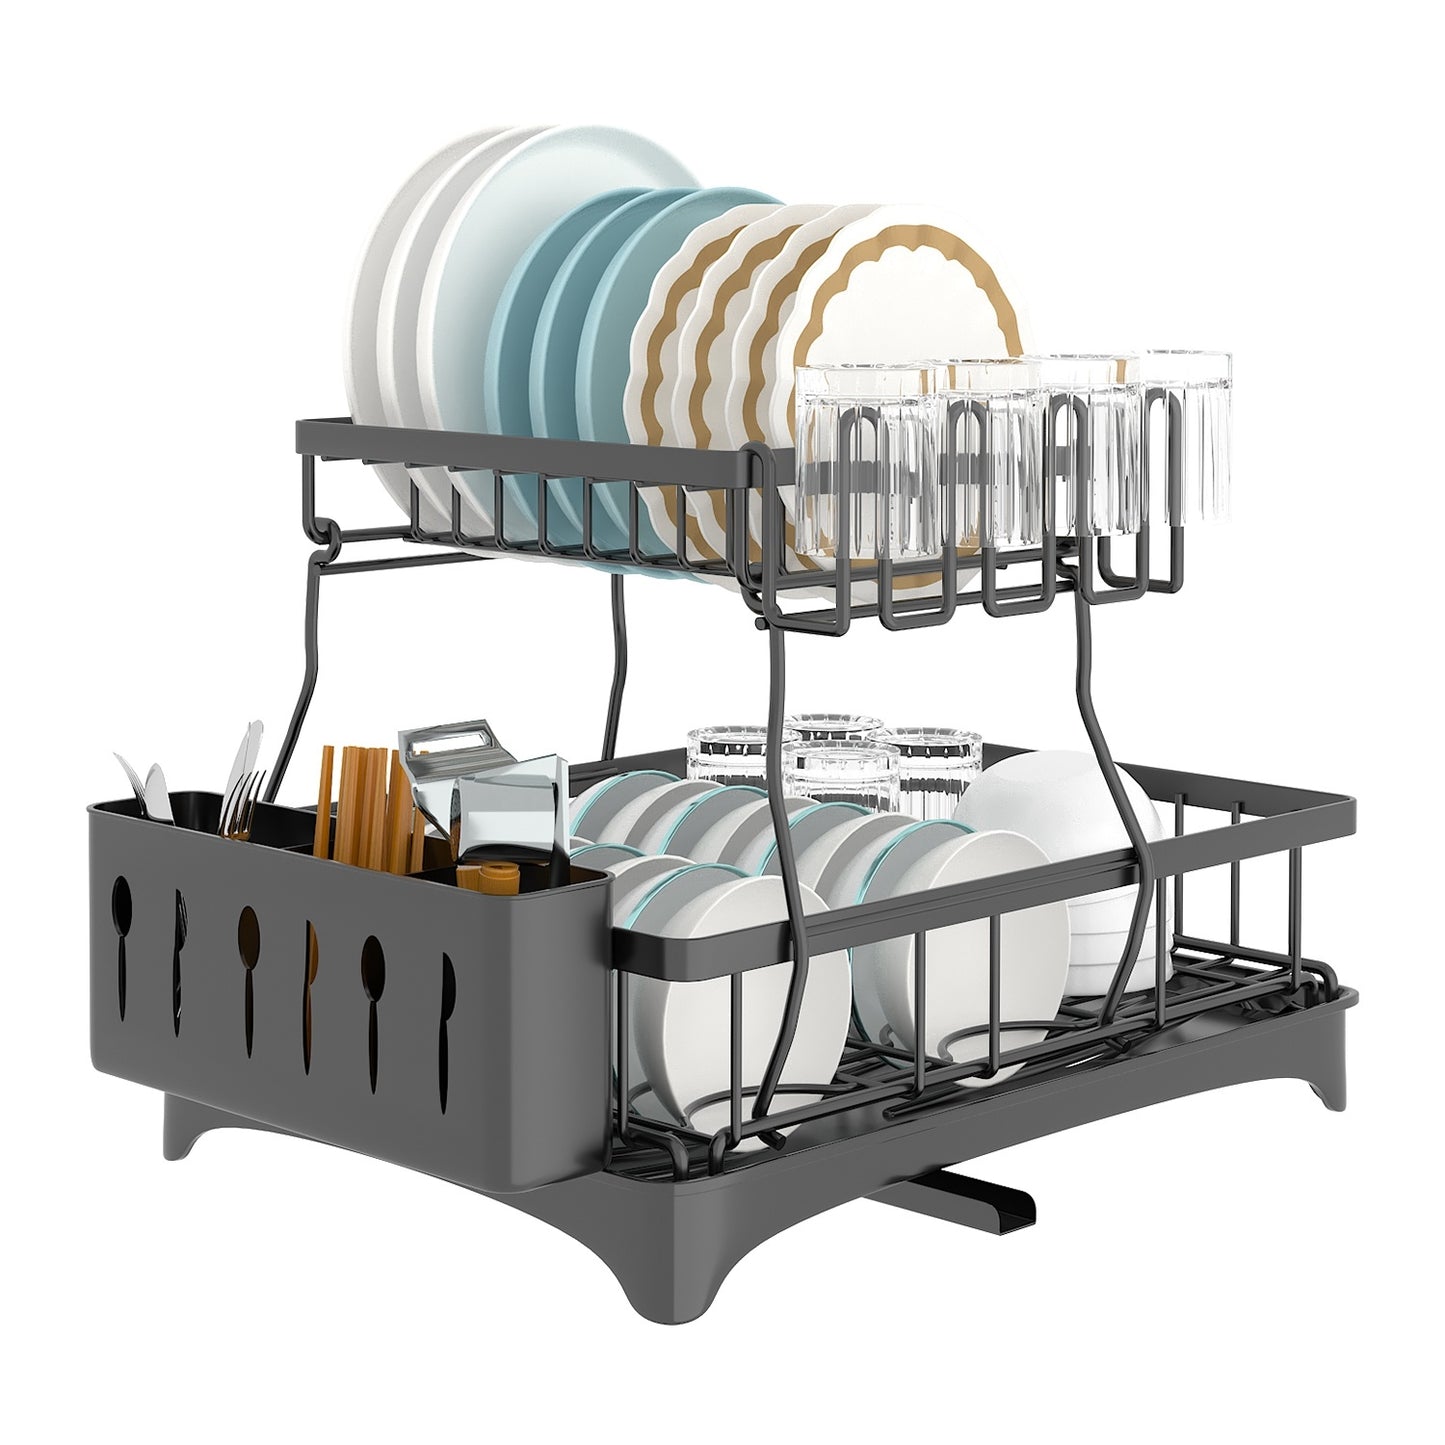 Dish Drying Rack for Kitchen Counter